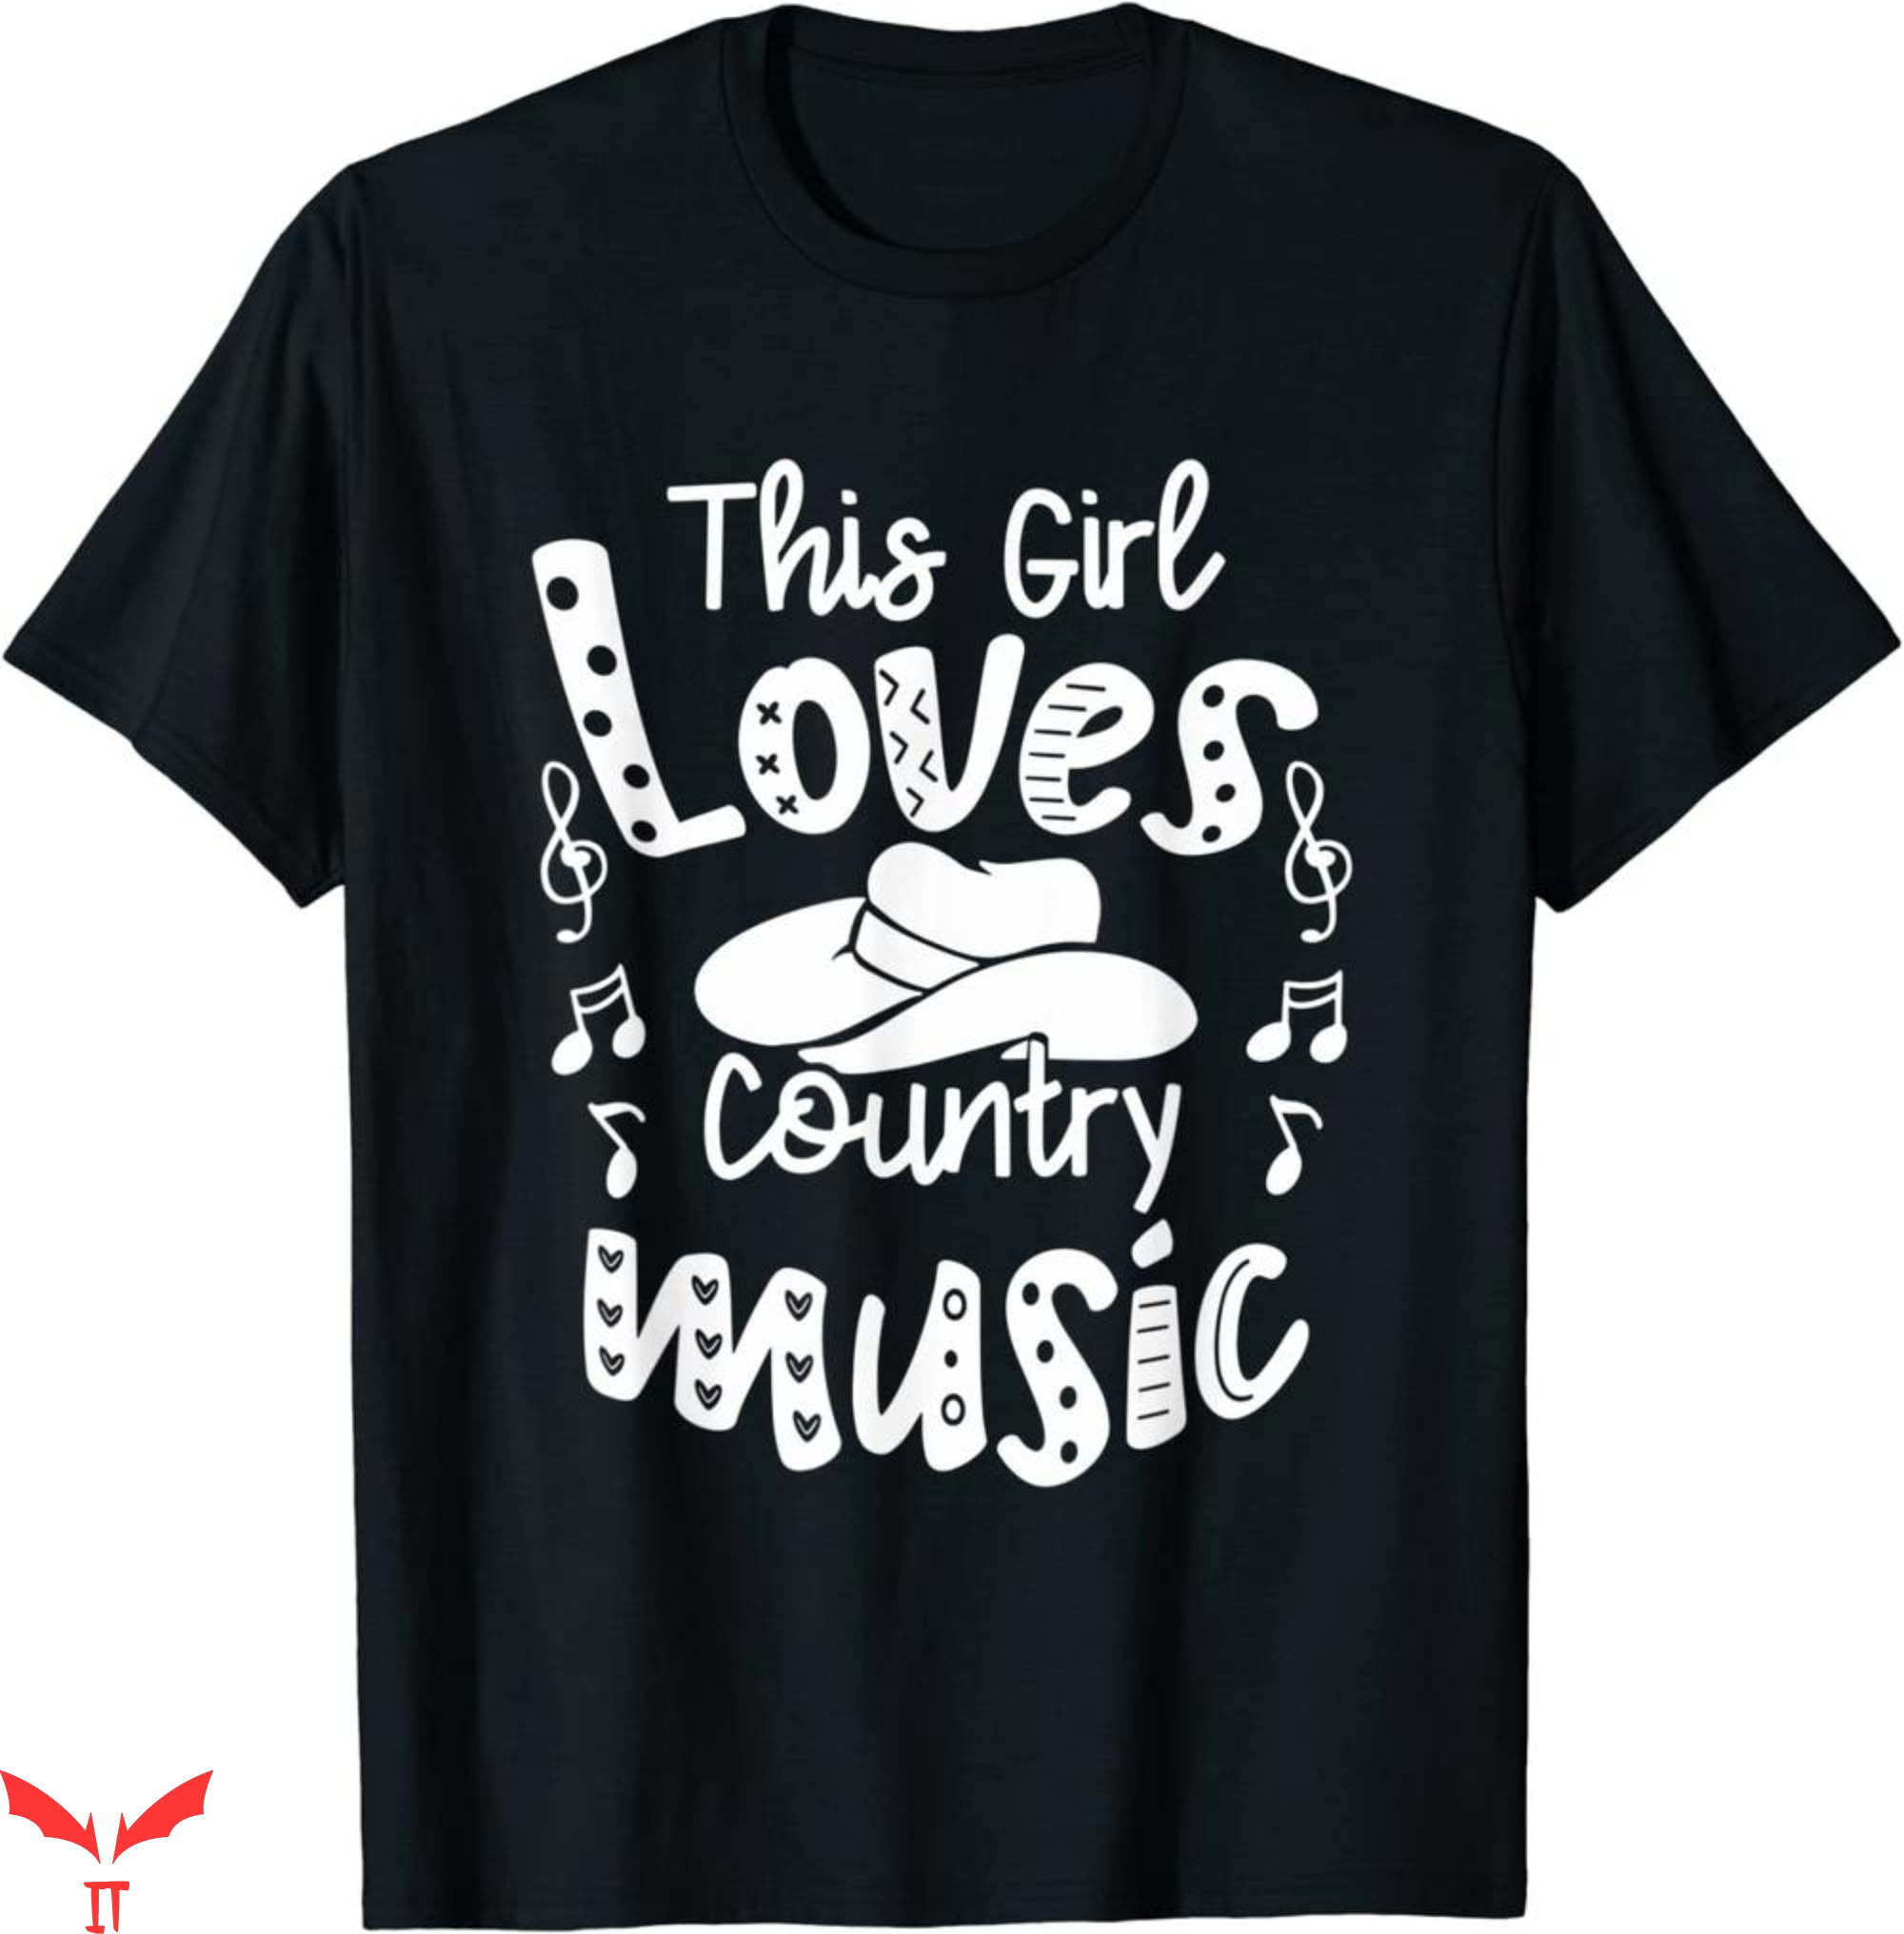 Country Music T-Shirt Funny Cowgirl Hat Music Lover Shirt